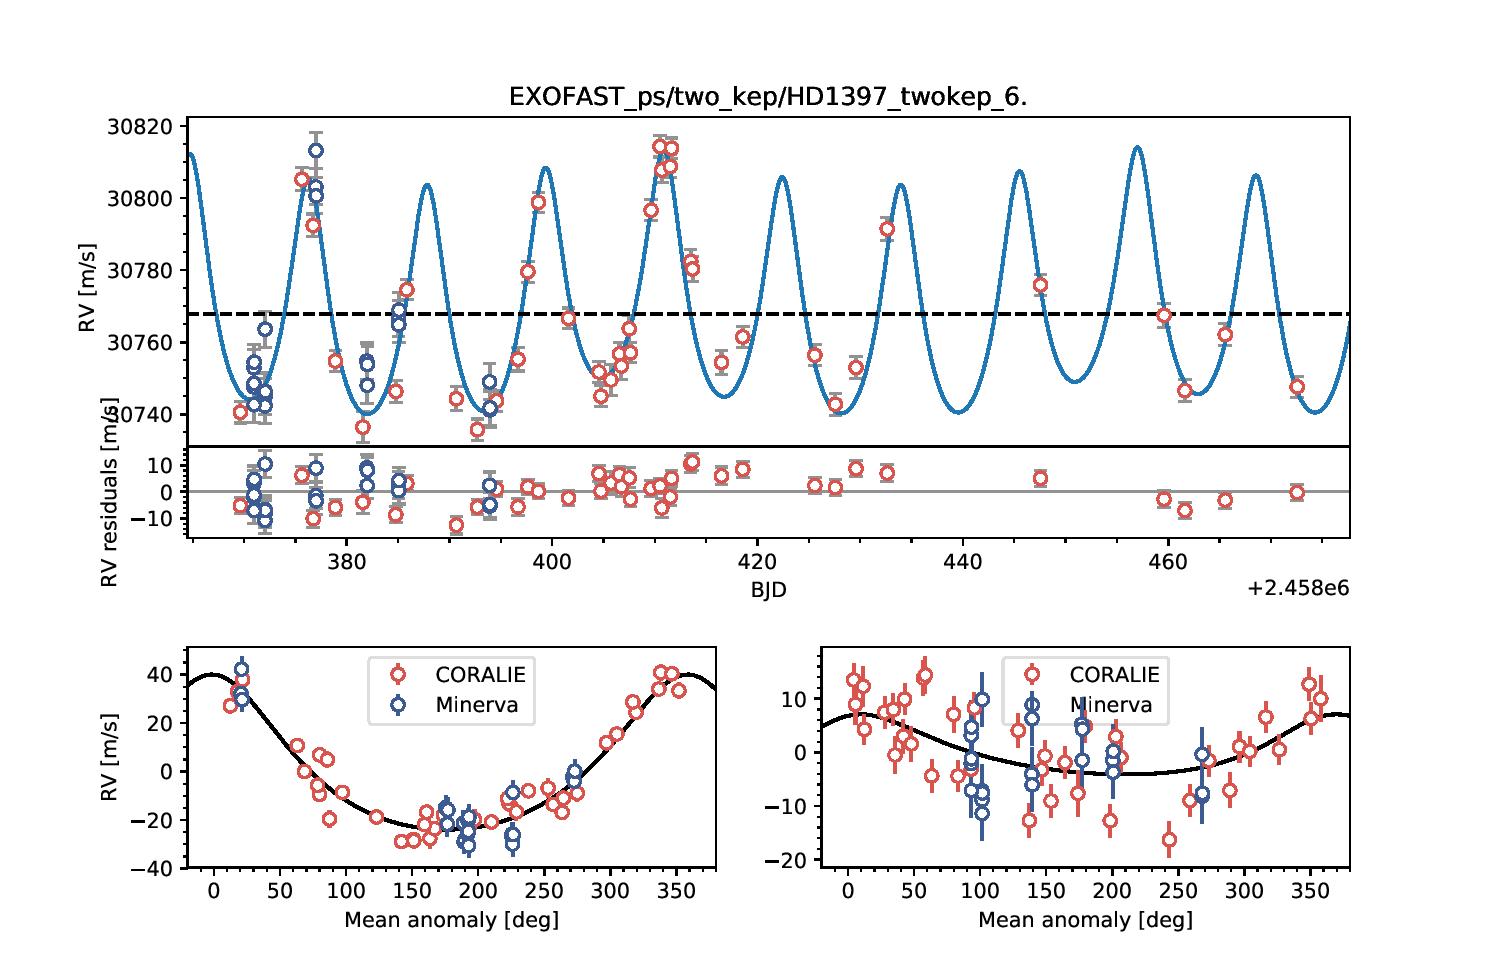 RV timeseries with Minerva-aus and CORALIE data